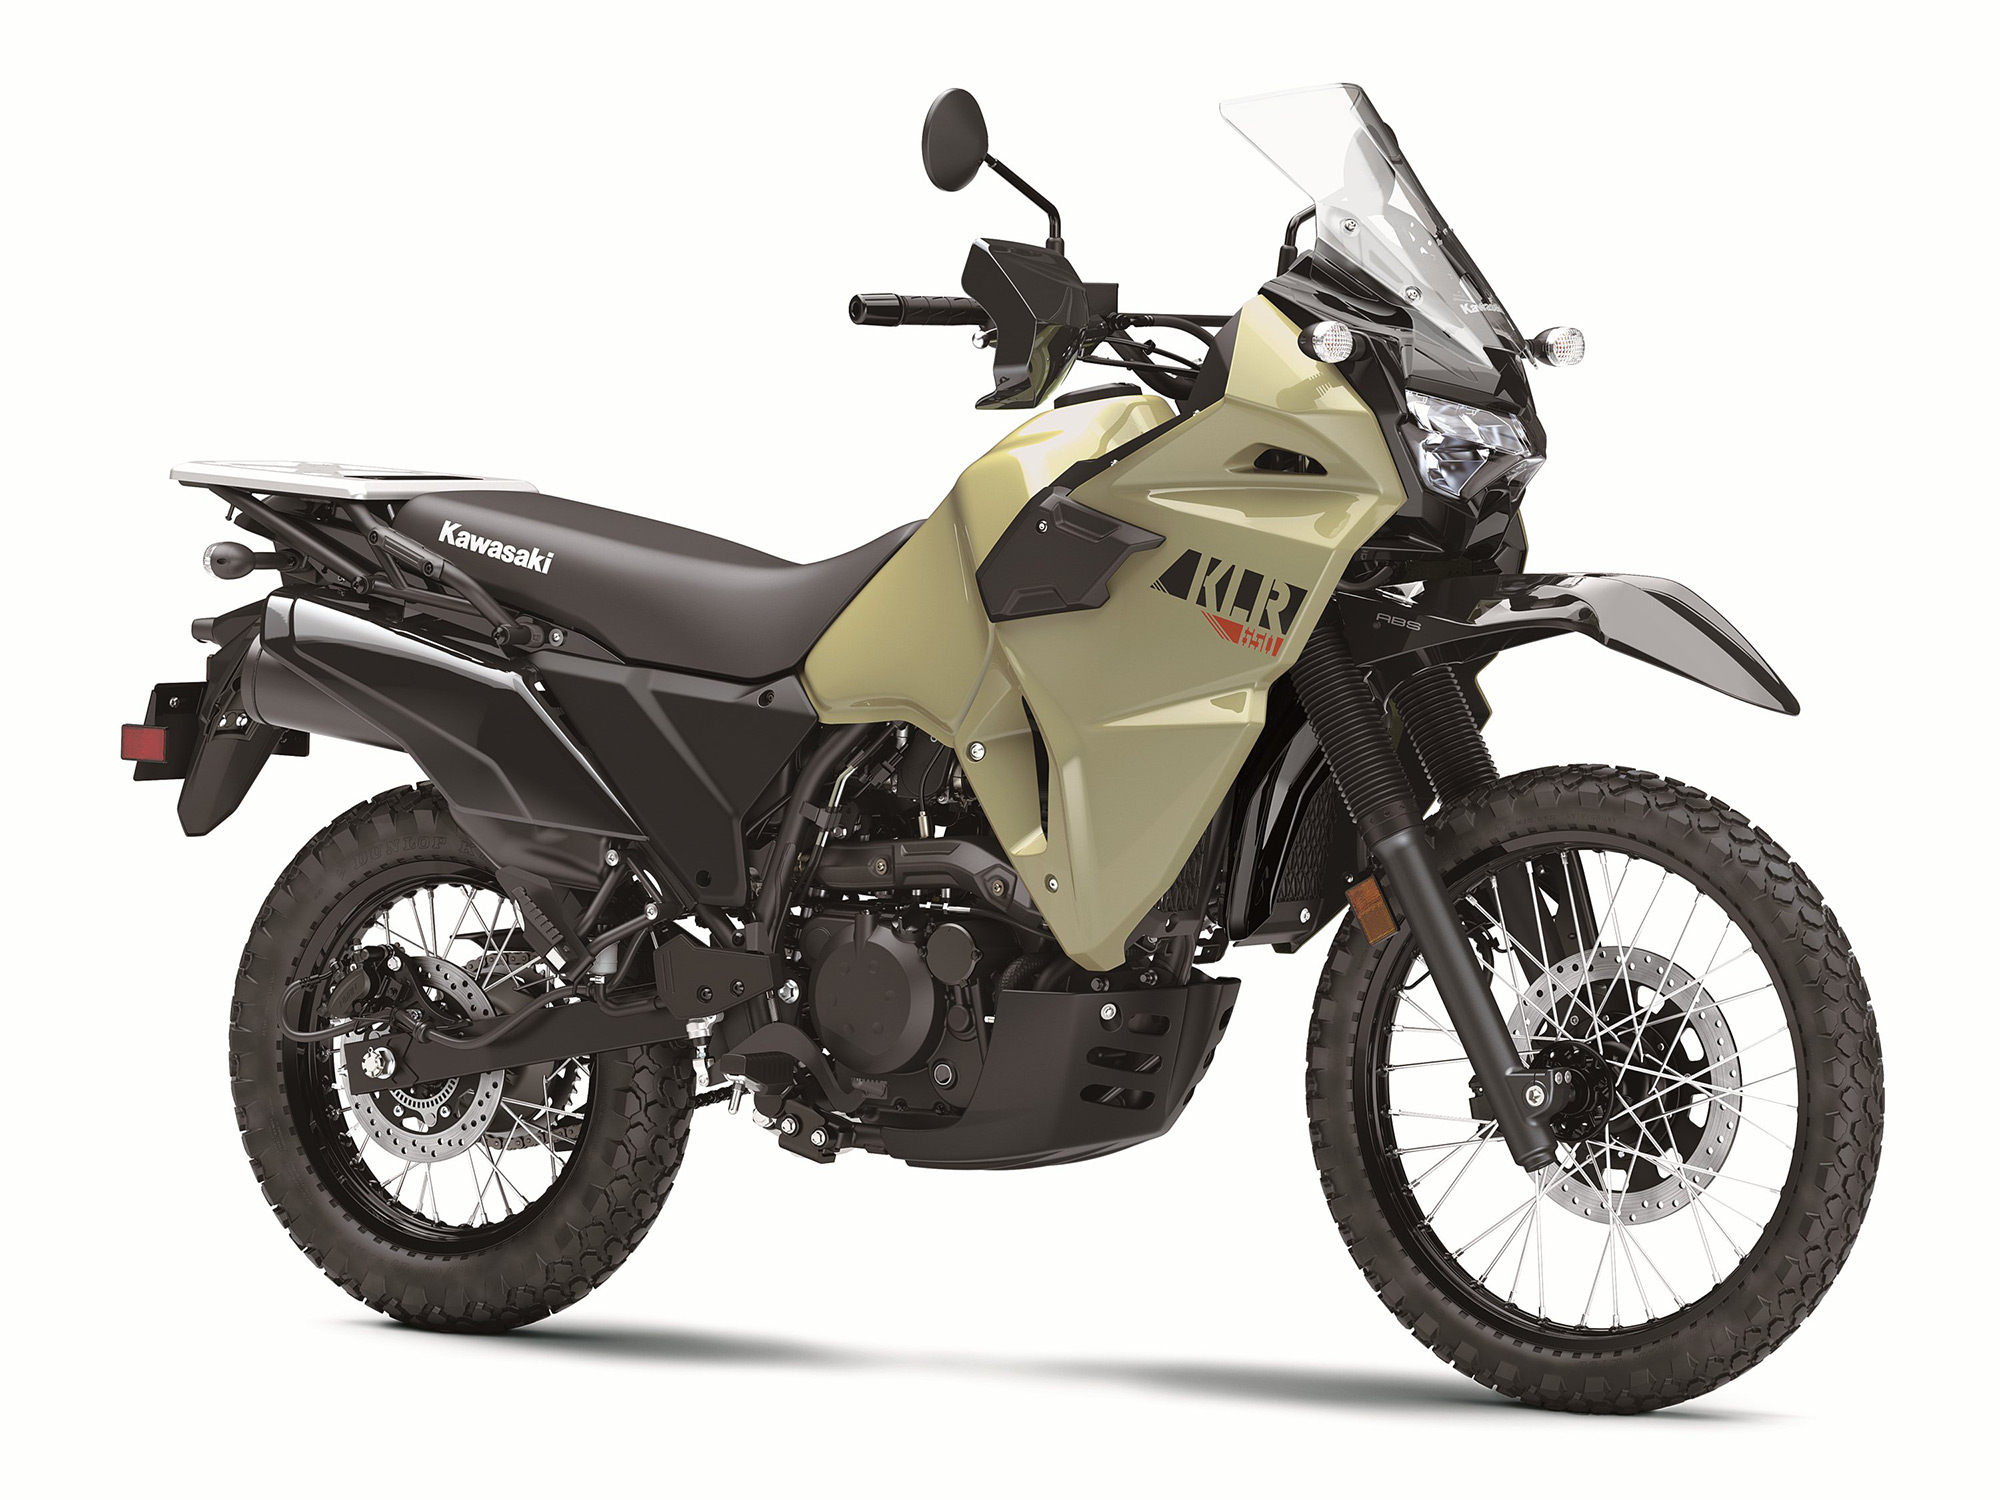 2022 KLR650 First Look | Cycle World